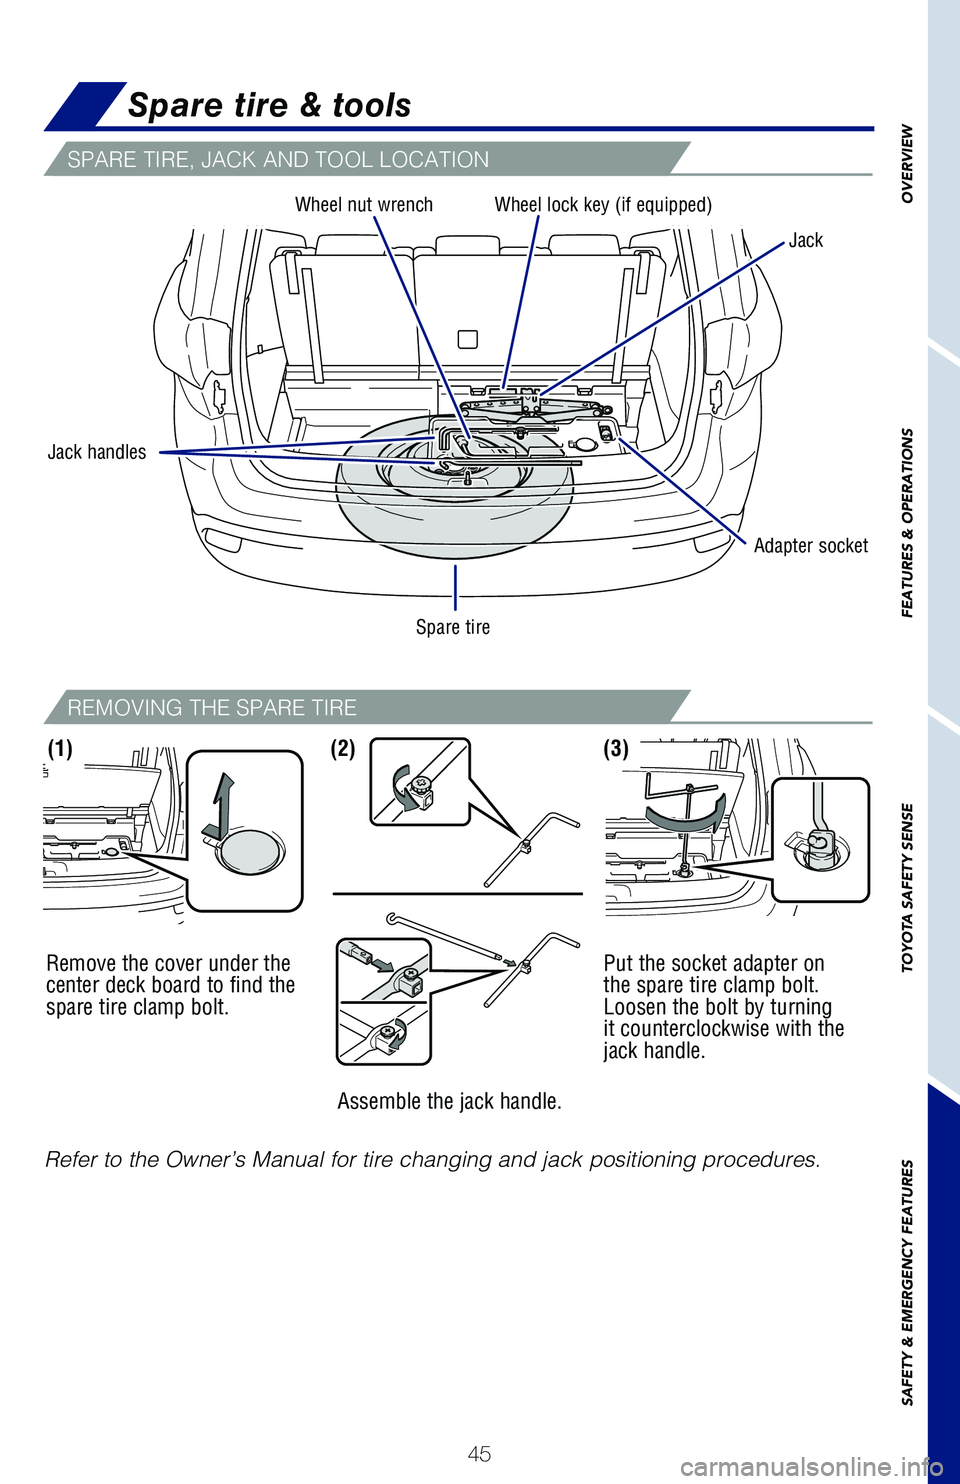 TOYOTA HIGHLANDER 2019  Owners Manual (in English) 45
OVERVIEW
FEATURES & OPERATIONS
TOYOTA SAFETY SENSE
SAFETY & EMERGENCY FEATURES
Refer to the Owner’s Manual for tire changing and jack positioning pr\�ocedures. Remove the cover under the 
cente